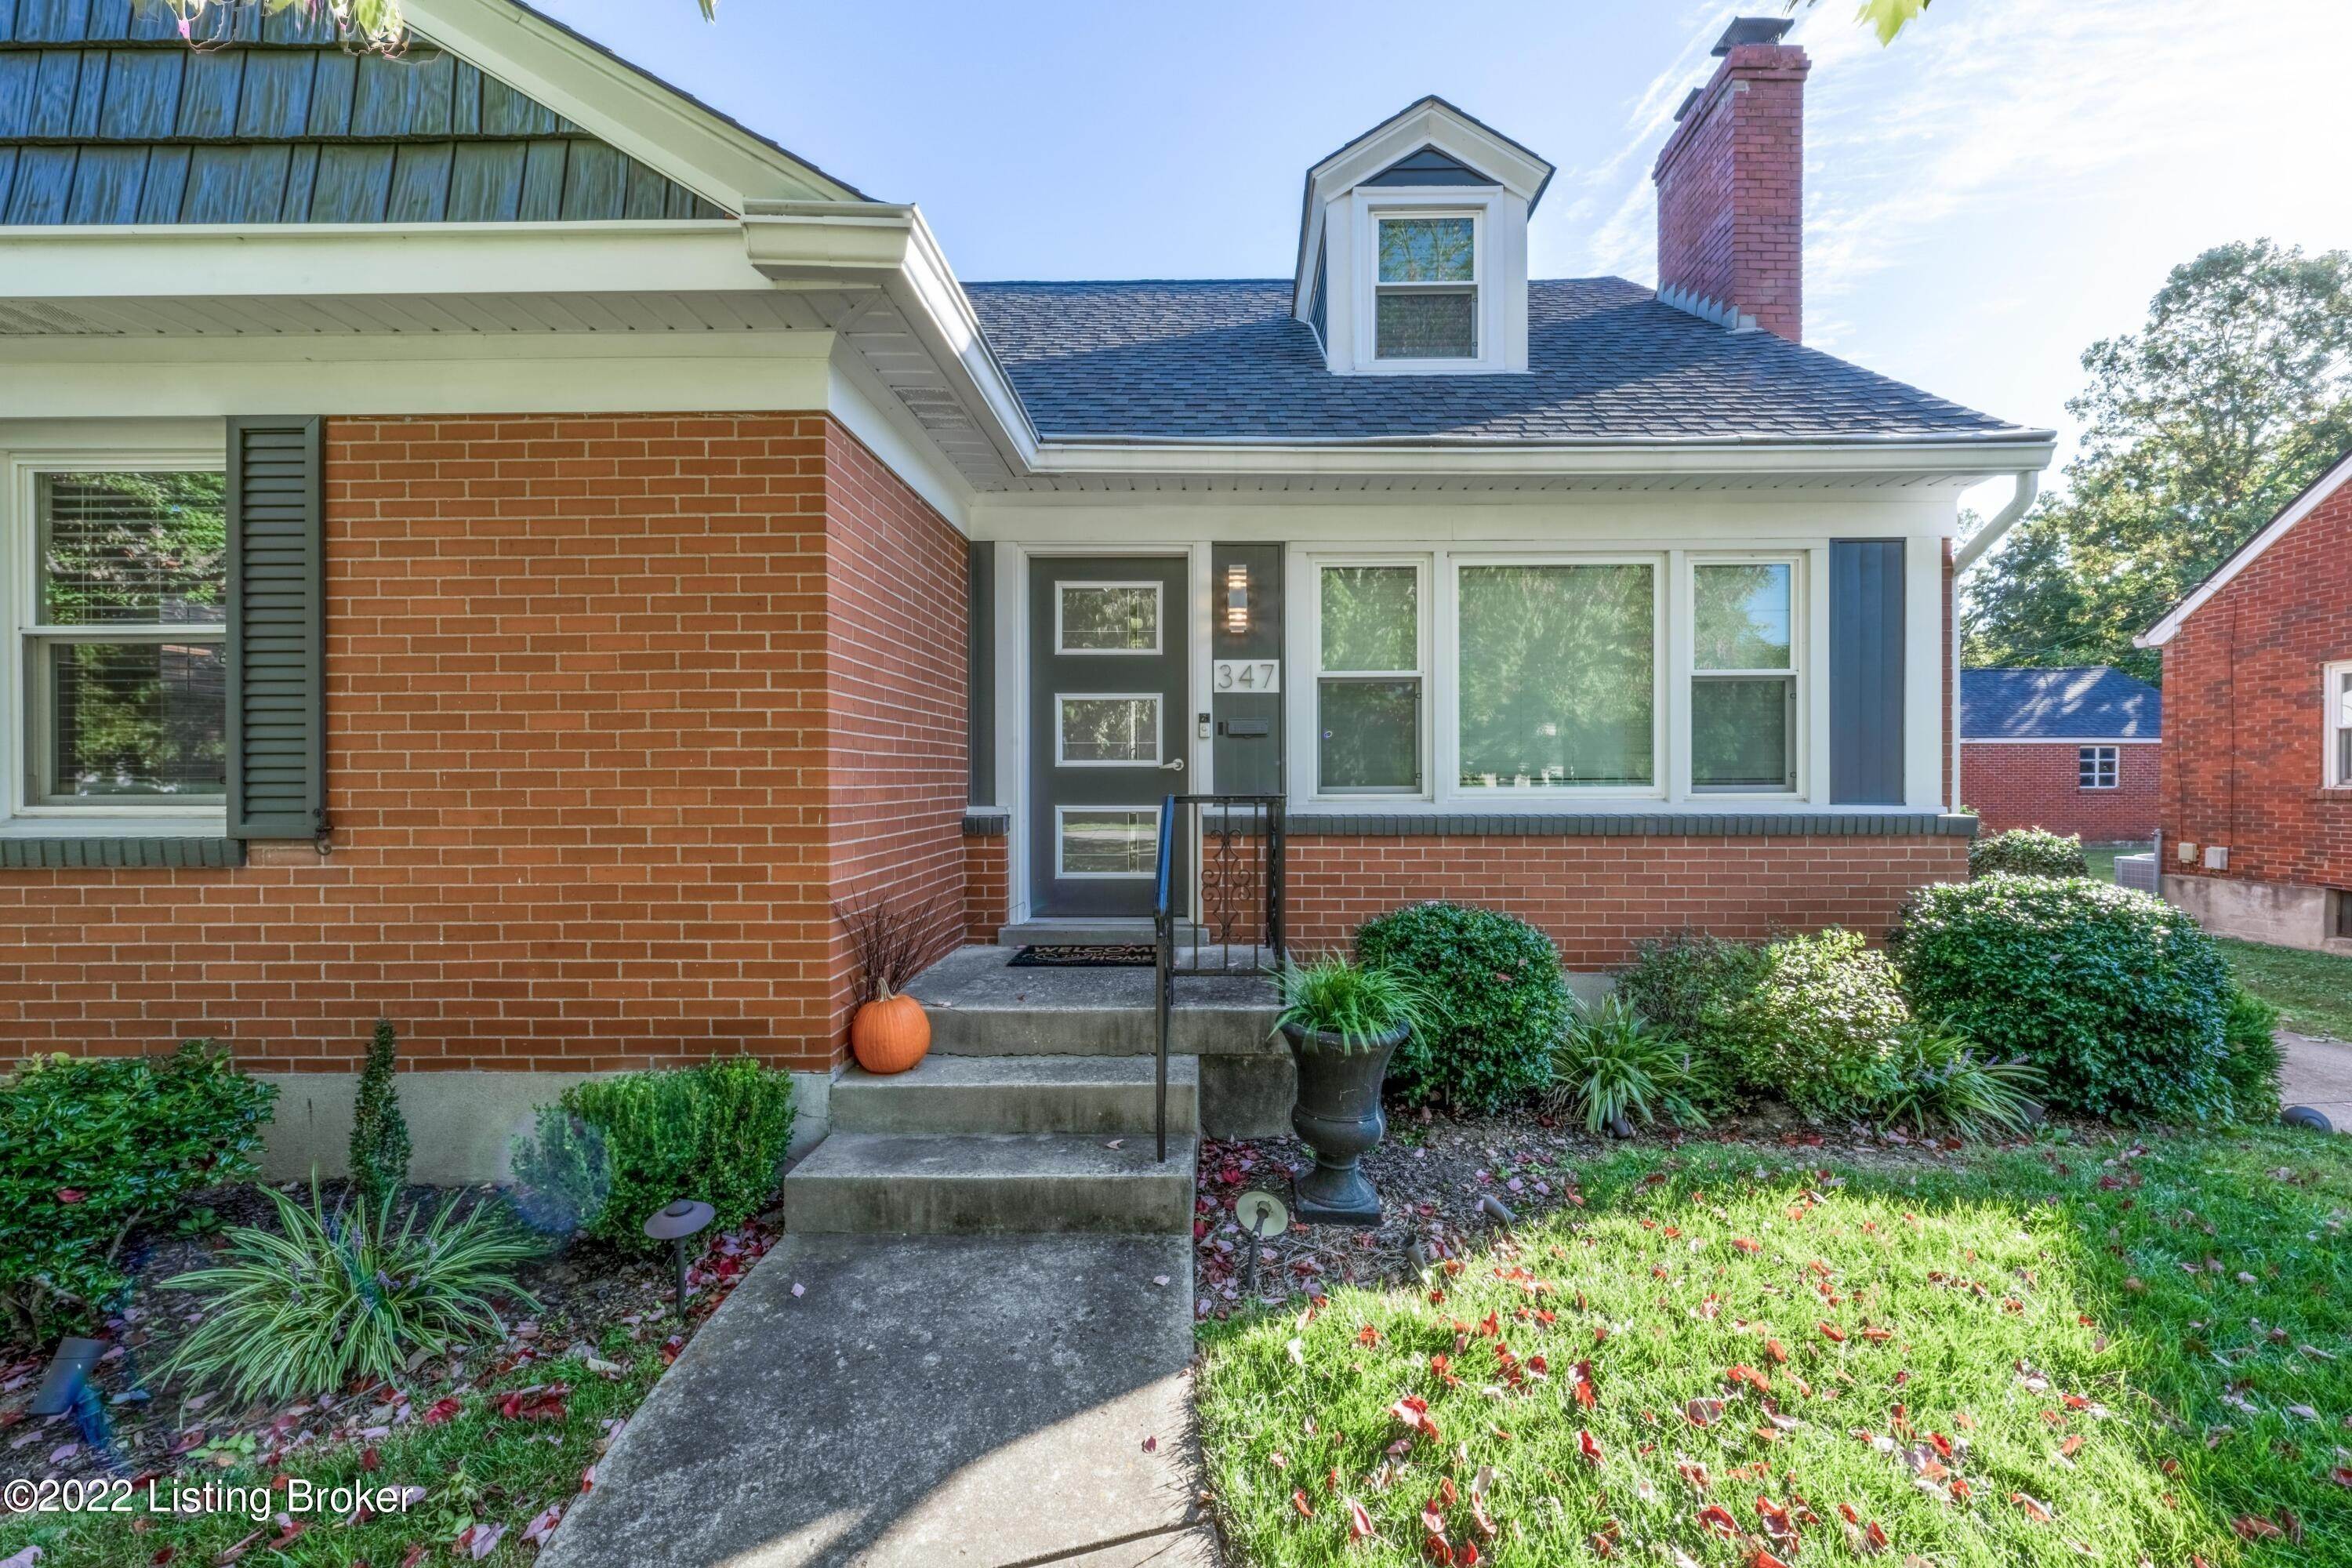 48. Single Family at Louisville, KY 40207